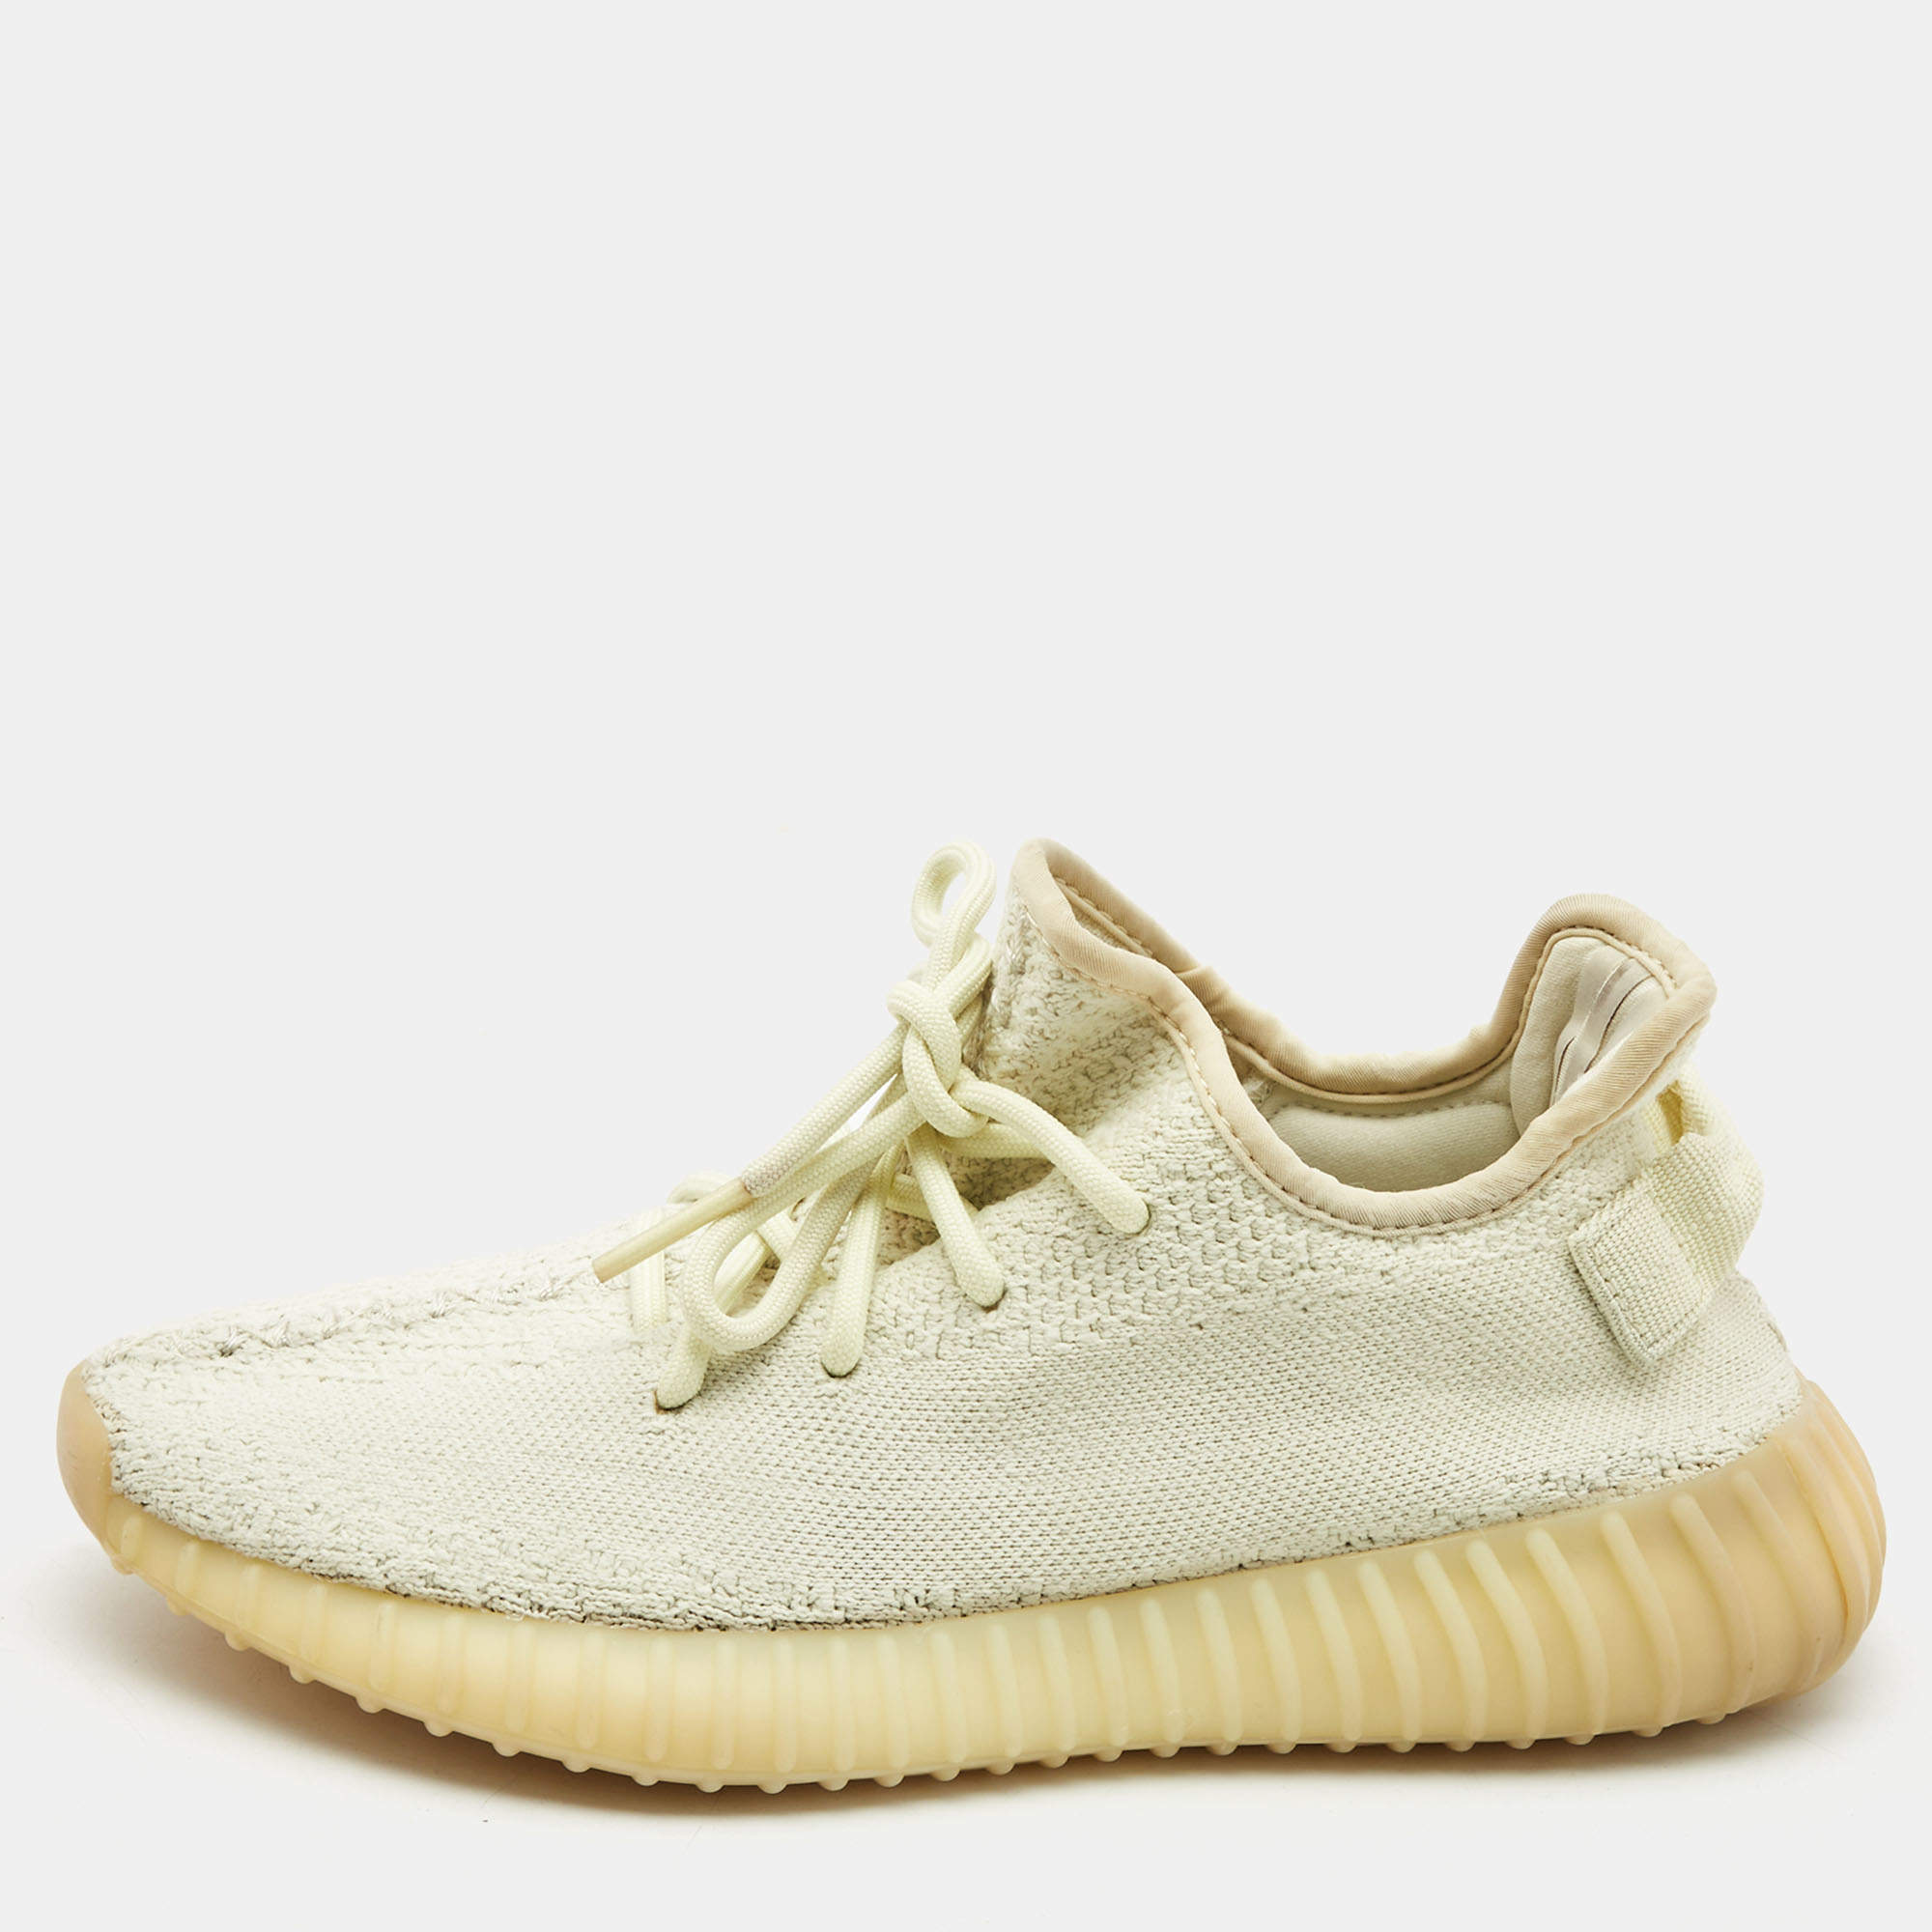 Yeezy x Adidas Green Knit Fabric Boost 350 V2 Sesame Sneakers Size 38 2/3